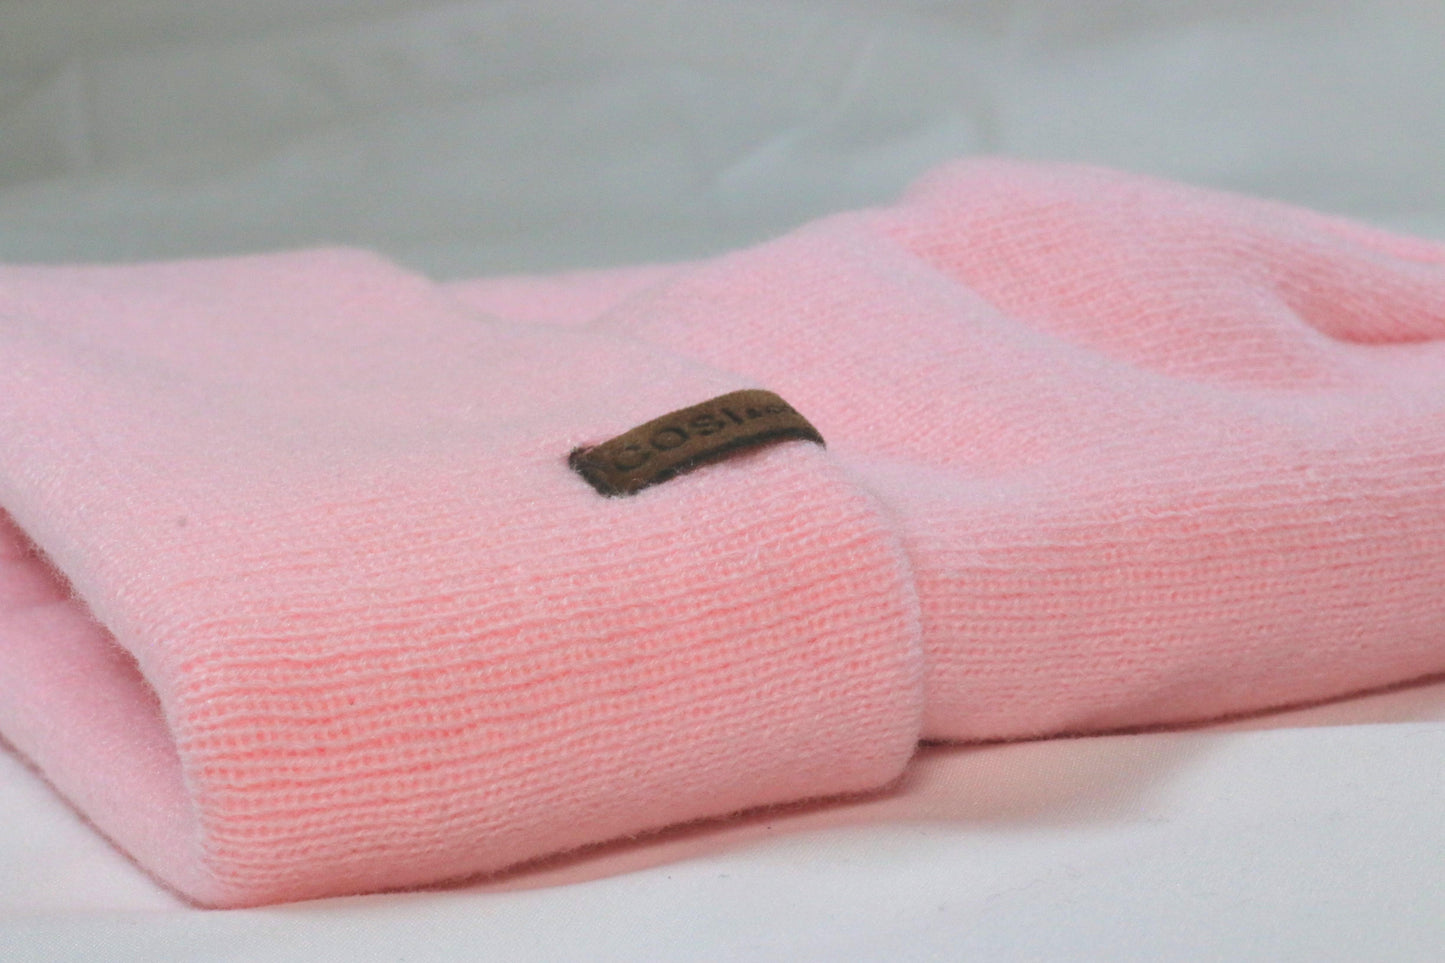 The Fit Beanie in Pink - COSI & co.